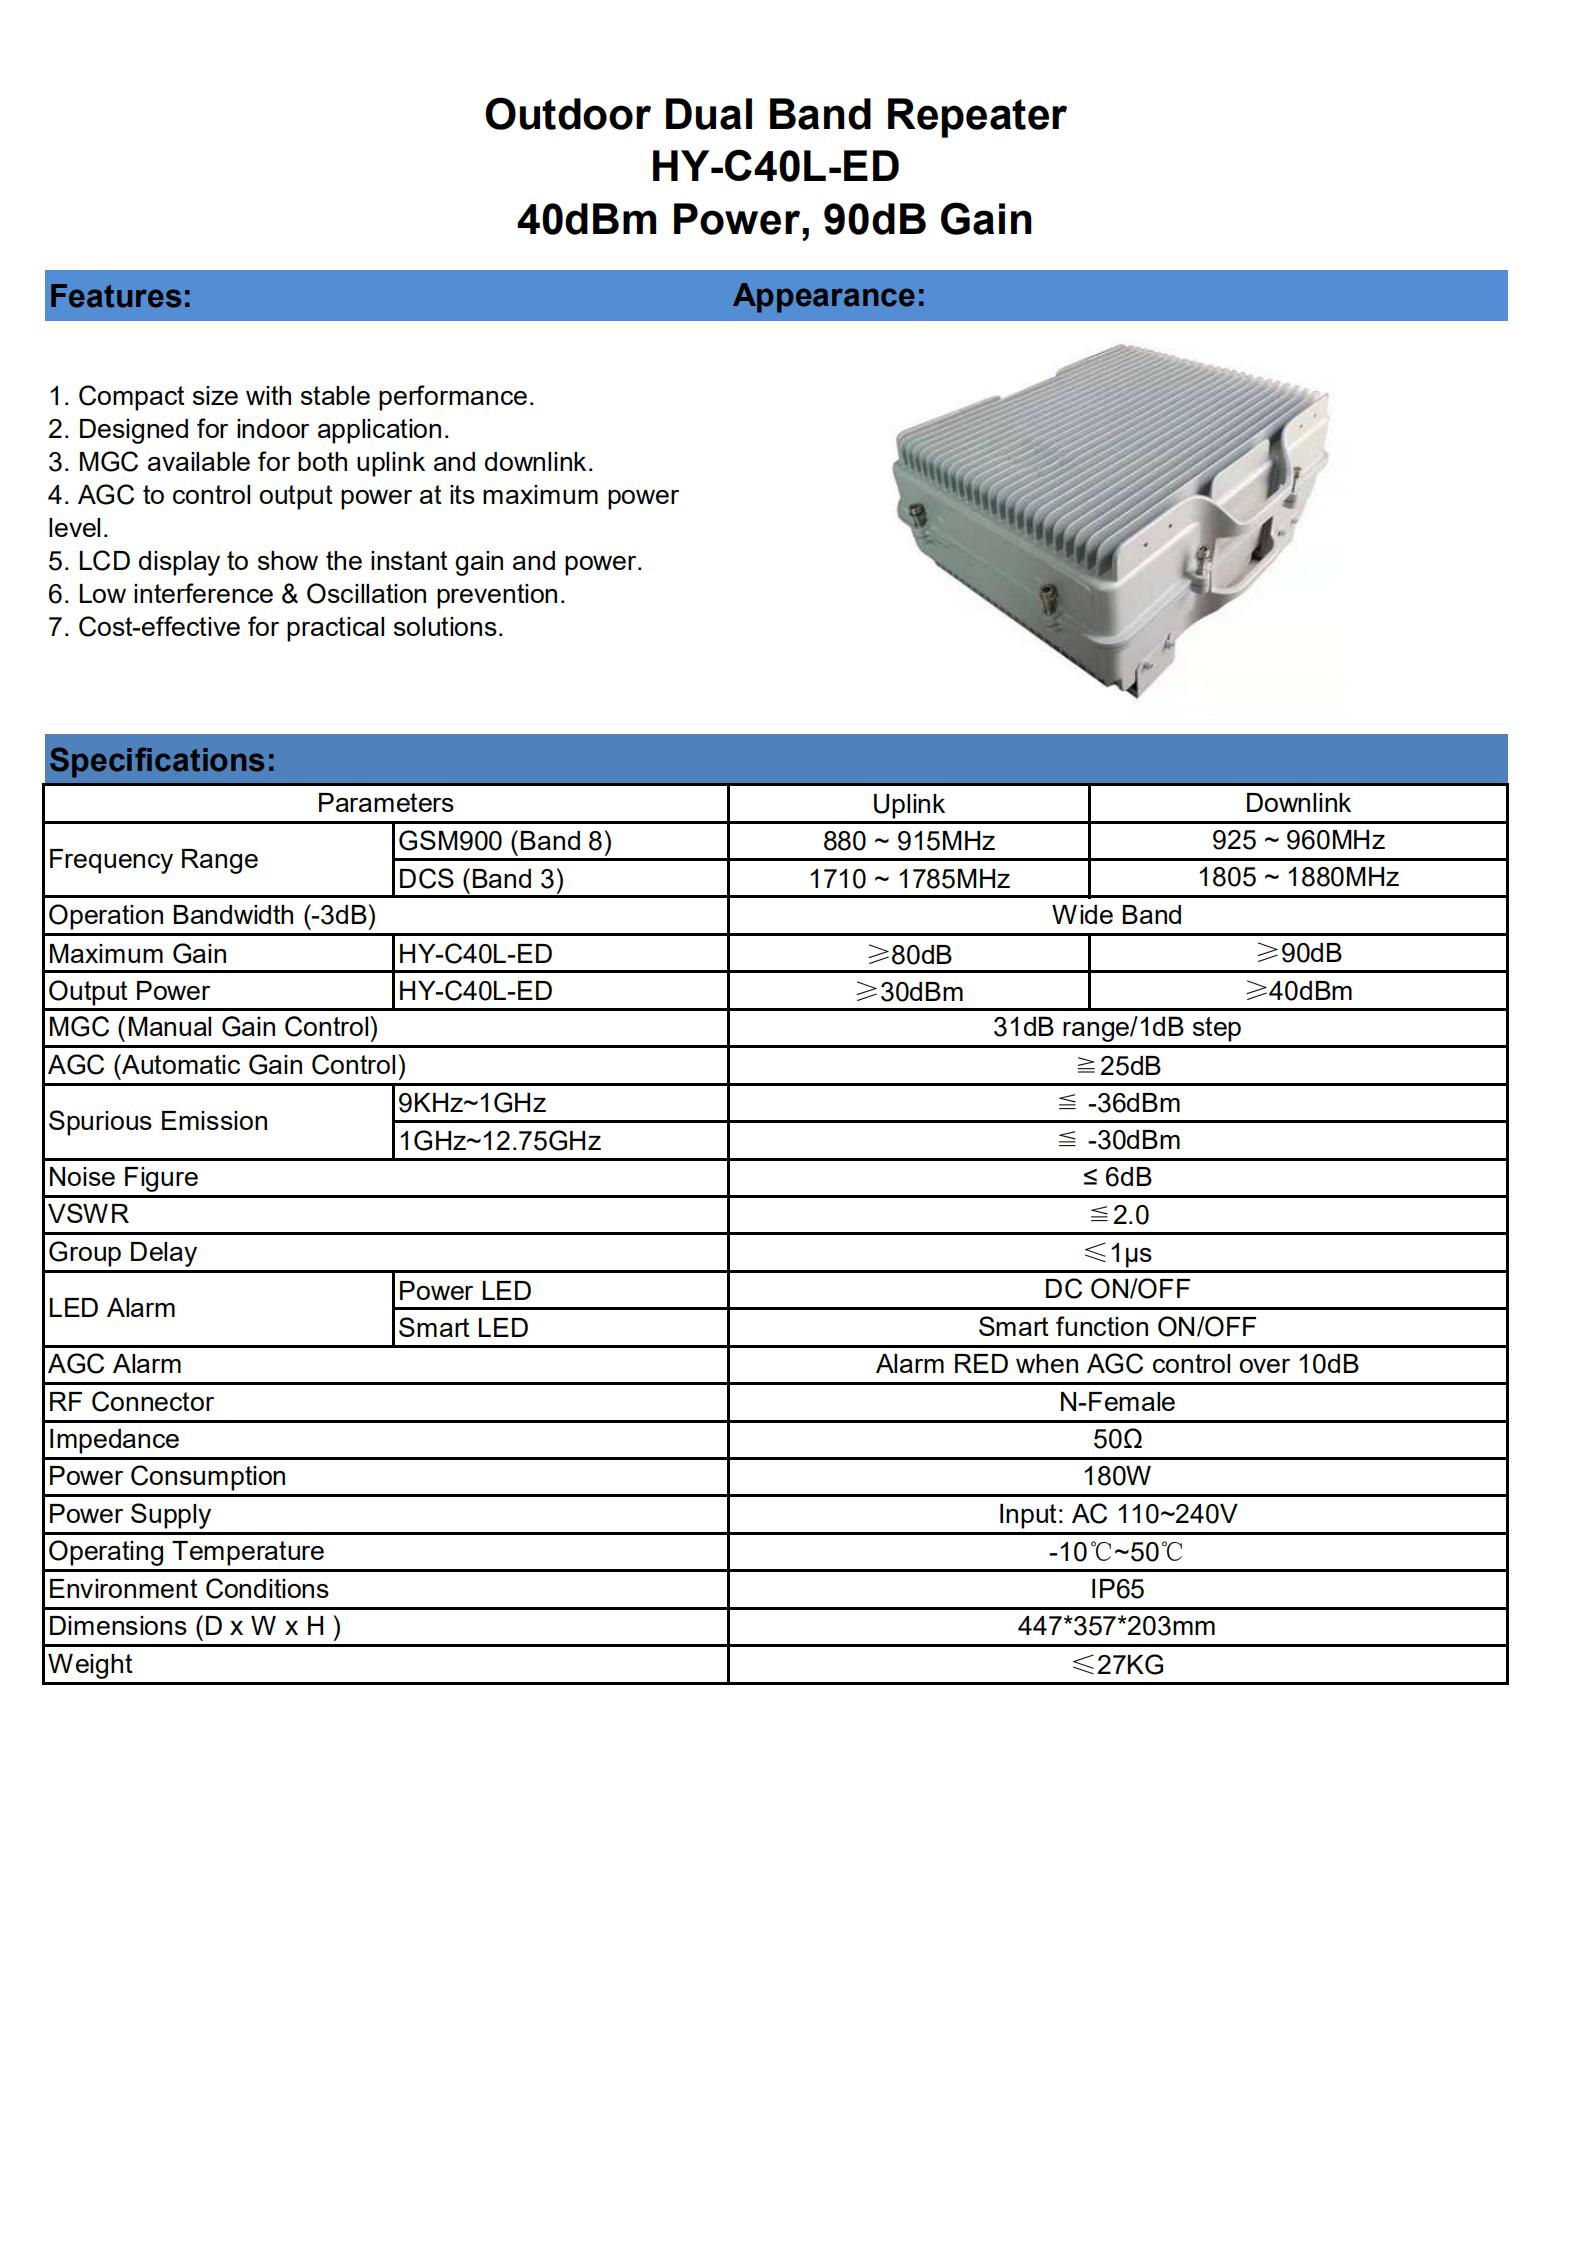 HY-C40L-ED Specifications_00.jpg